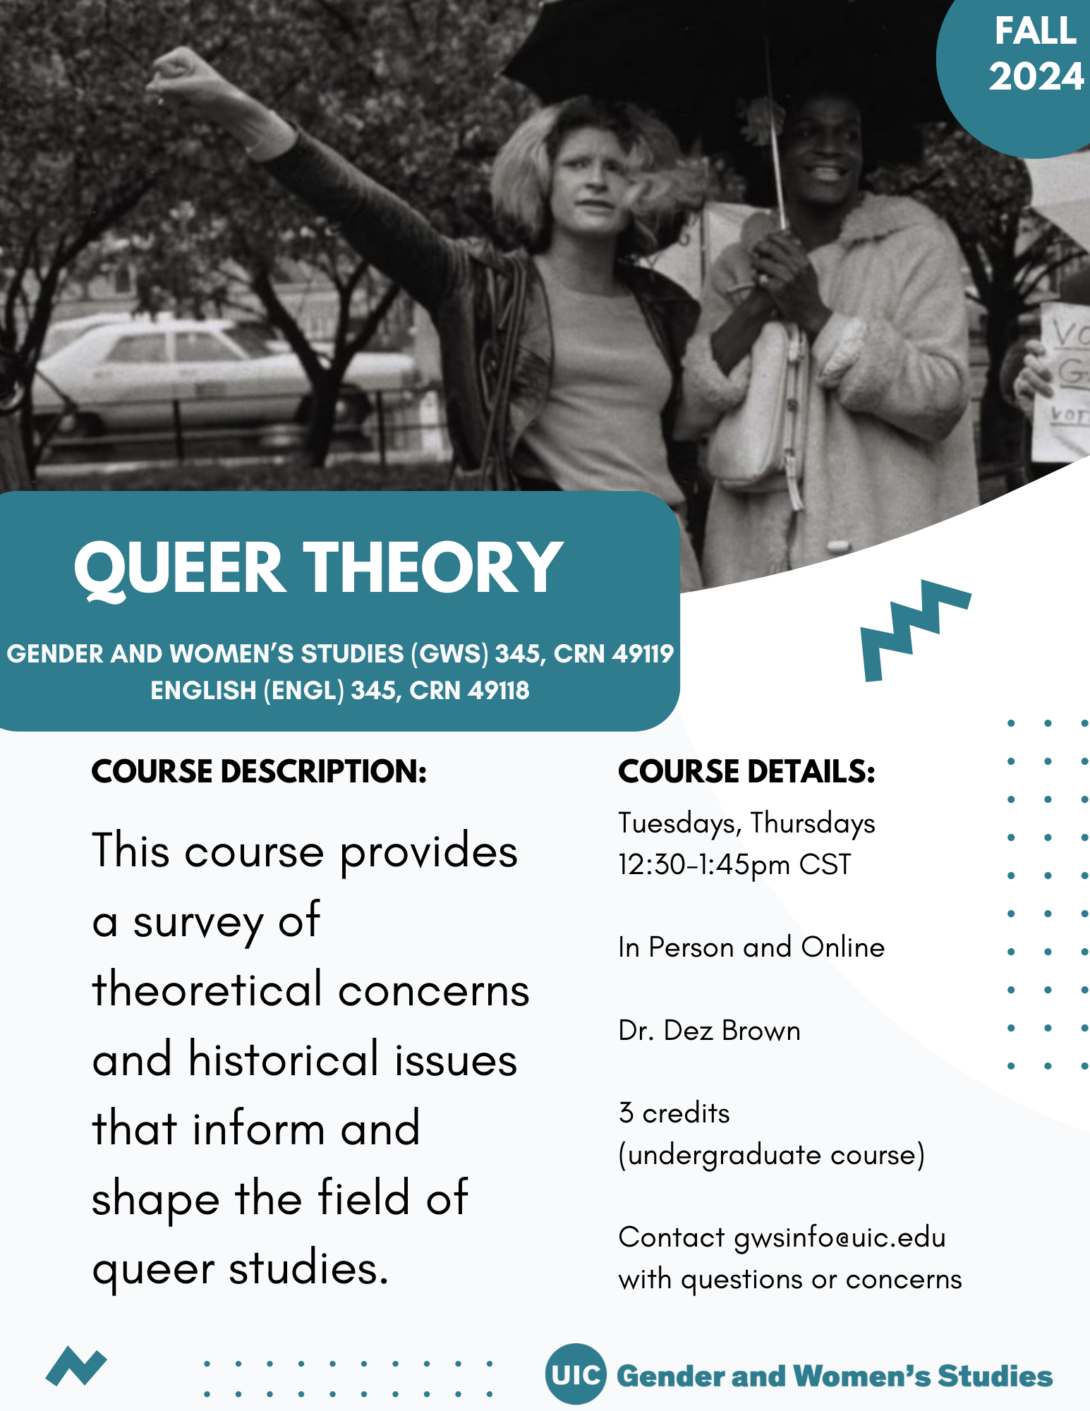 A flyer promoting the fall 2024 Queer Theory course. The top portion of the flyer includes a black and white photo of Sylvia Rivera and Marsha P. Johnson standing side-by-side. Rivera is holding up a fist with their right hand. Johnson is holding an umbrella overhead. In the top right corner is a teal circle with Fall 2024 inside it in white text. The bottom left portion of the photo is covered with a teal block that includes the course title in white text. Below that is the course description and course details in black text on a white background. A teal GWS logo appears in the bottom right of the flyer. Parallel lines of teal dots and teal geometric designs decorate the page.